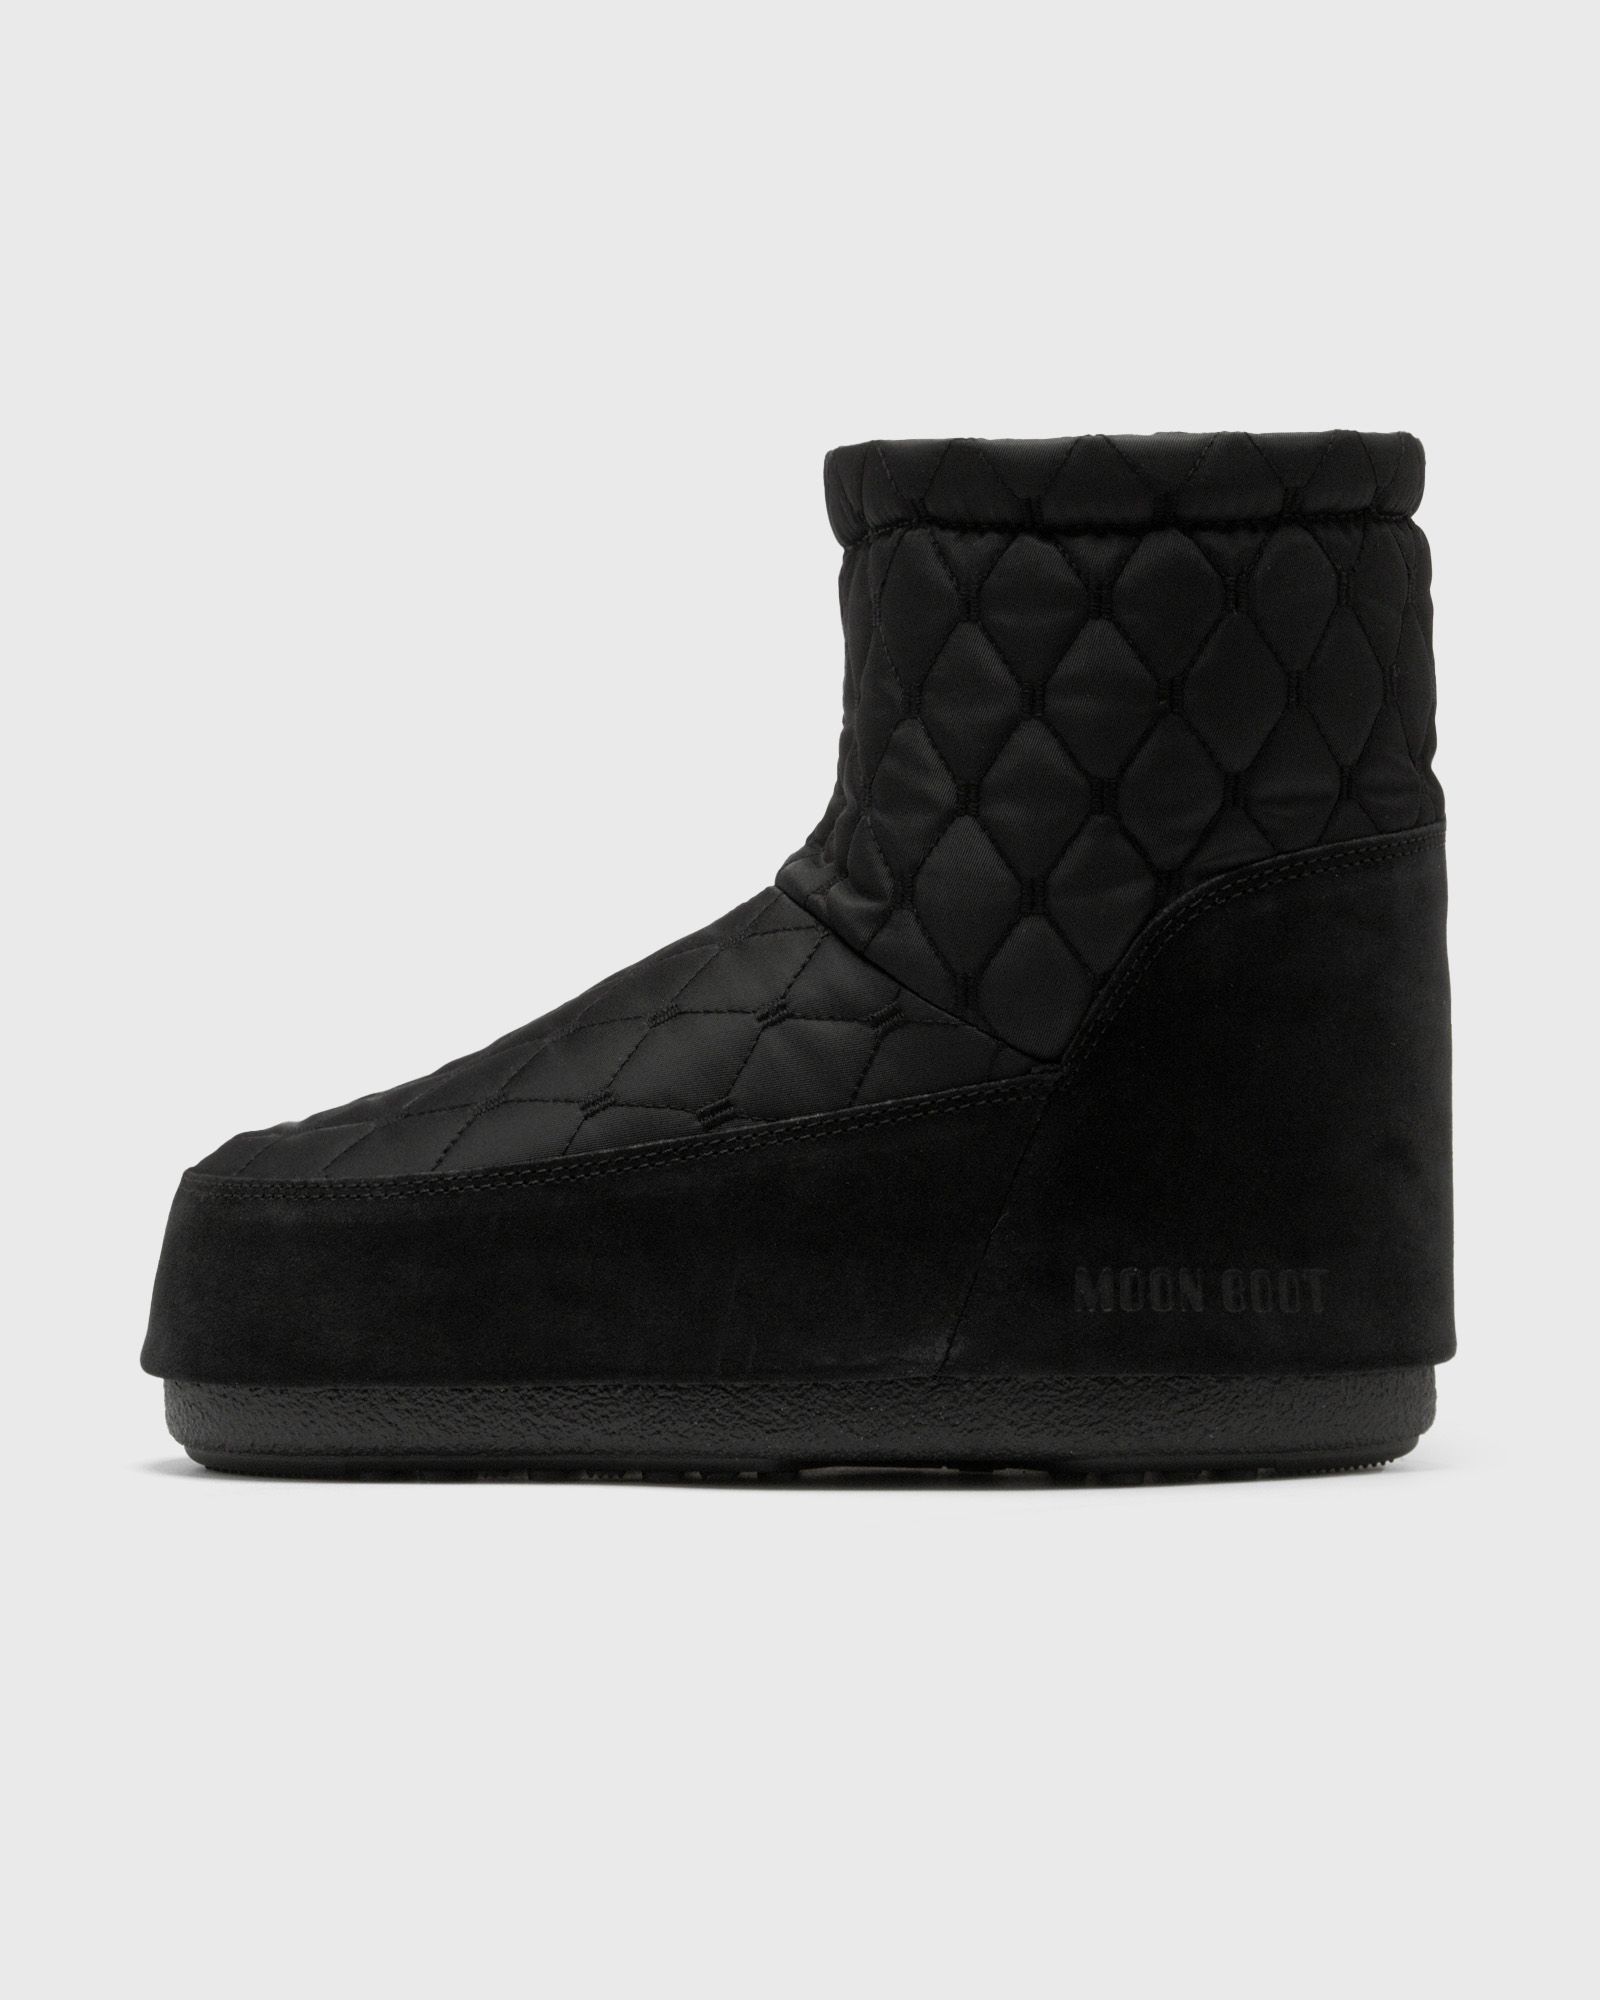 Moon Boot ICON LOW NOLACE QUILTED men Boots black in Größe:36-38 von Moon Boot